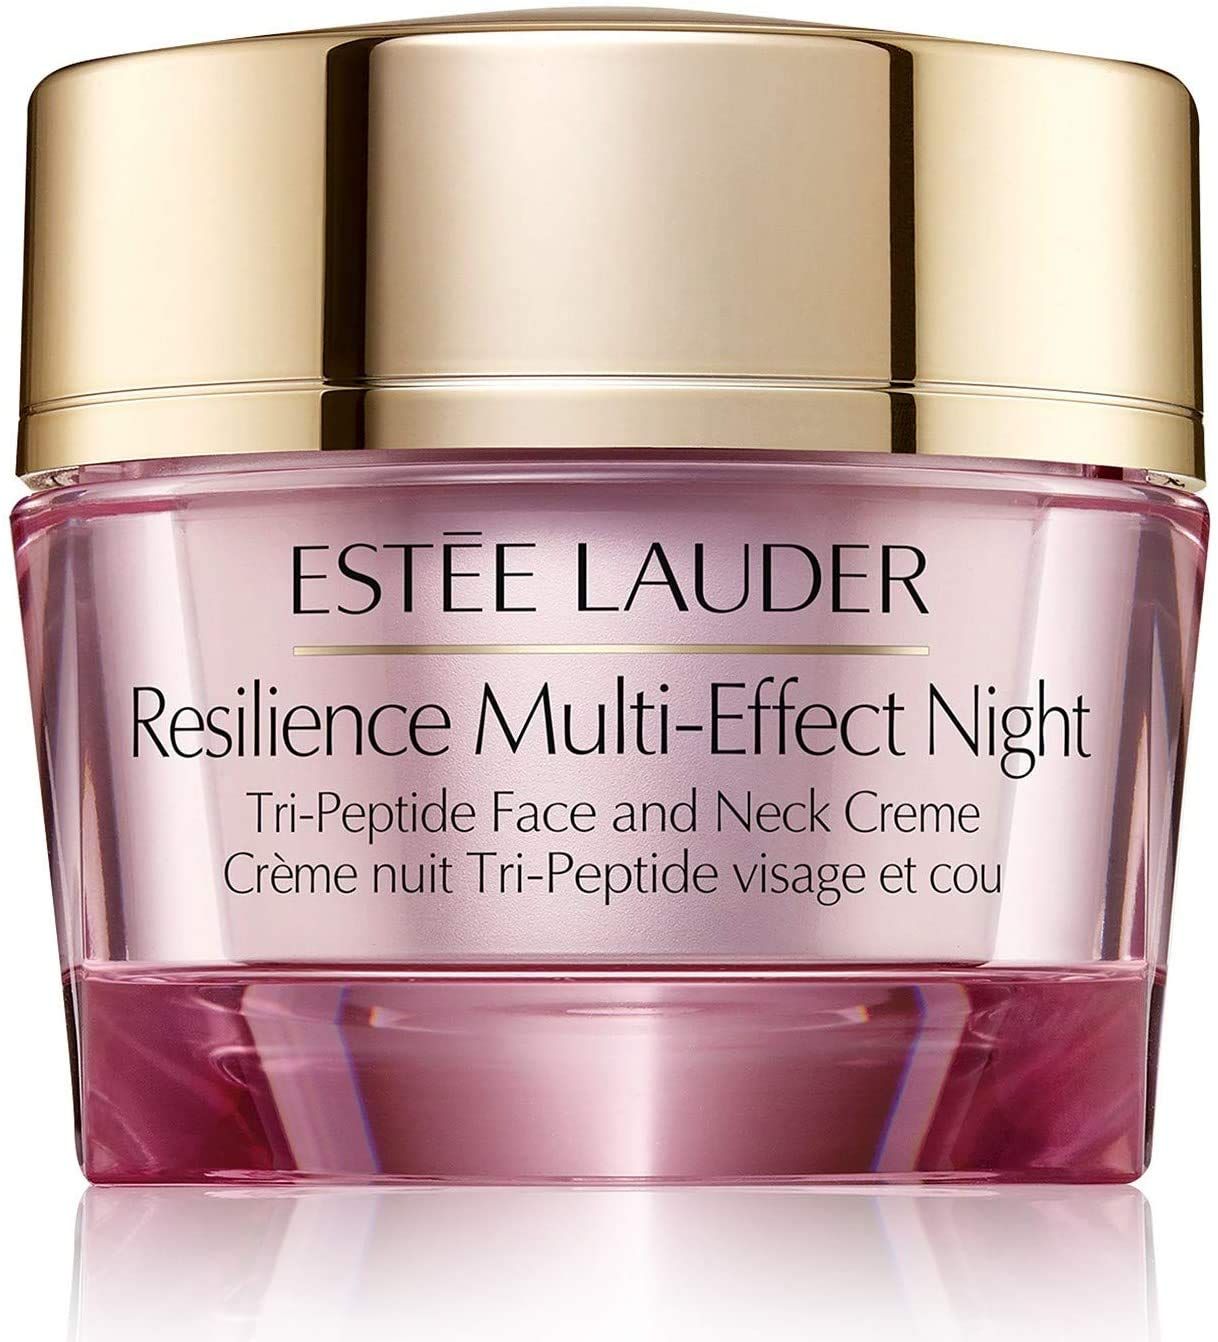 Estee Lauder Resilience Multi-Effect Night Tri-Peptide Face and Neck Creme, 1 oz / 30 ml